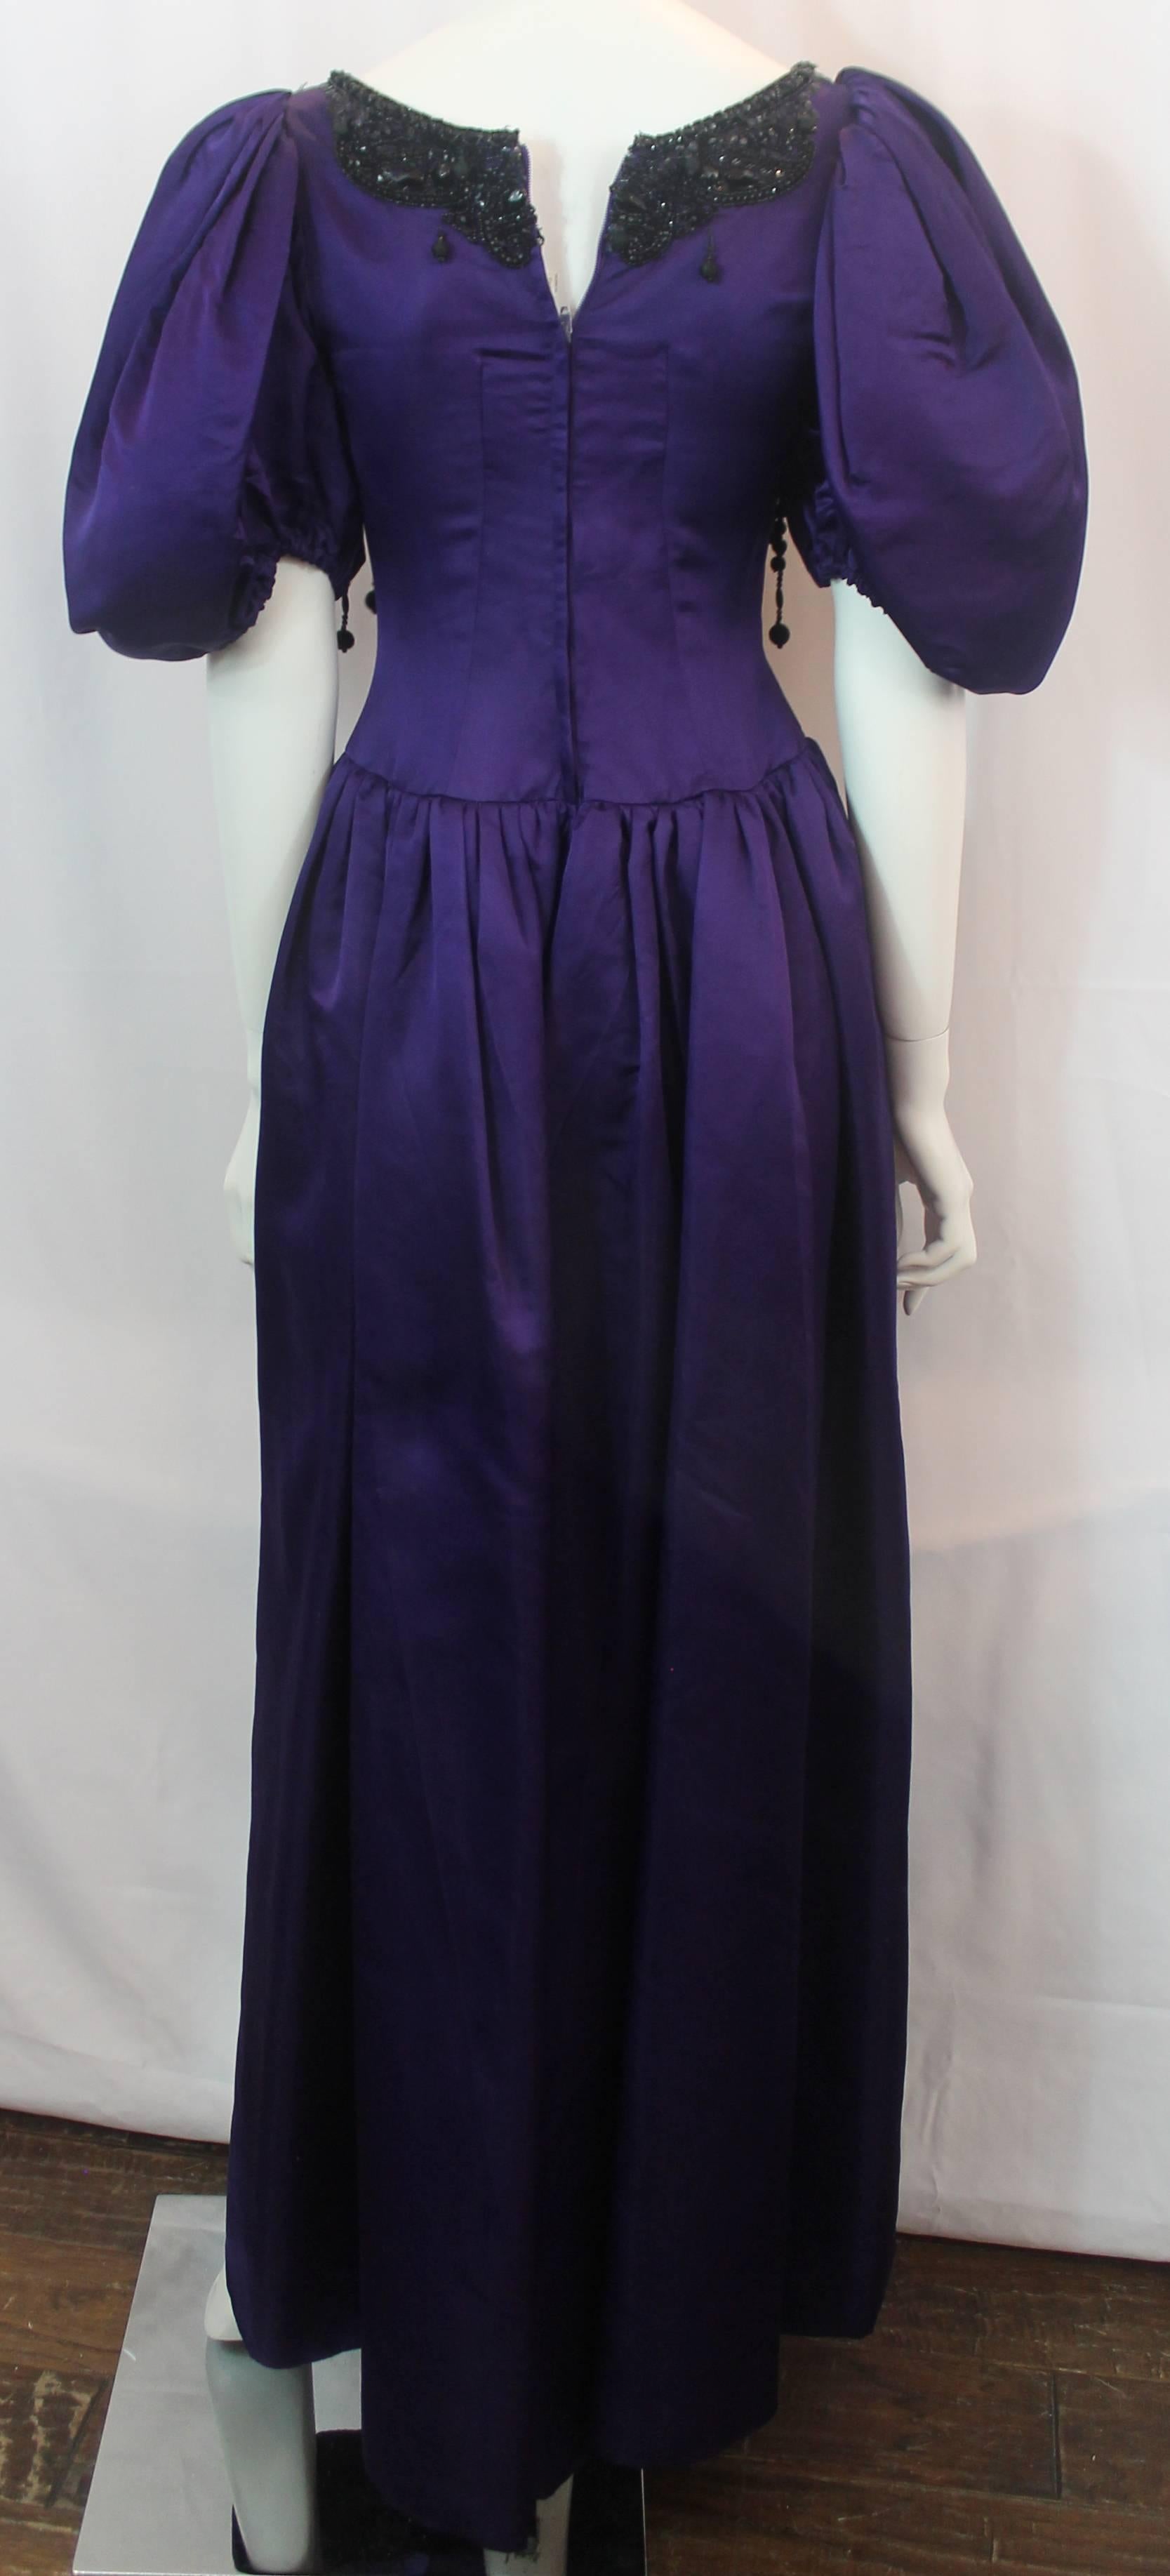 Women's Oscar de la Renta Purple Silk Gown with Puffy Sleeves and Beading - 8 -circa 90s